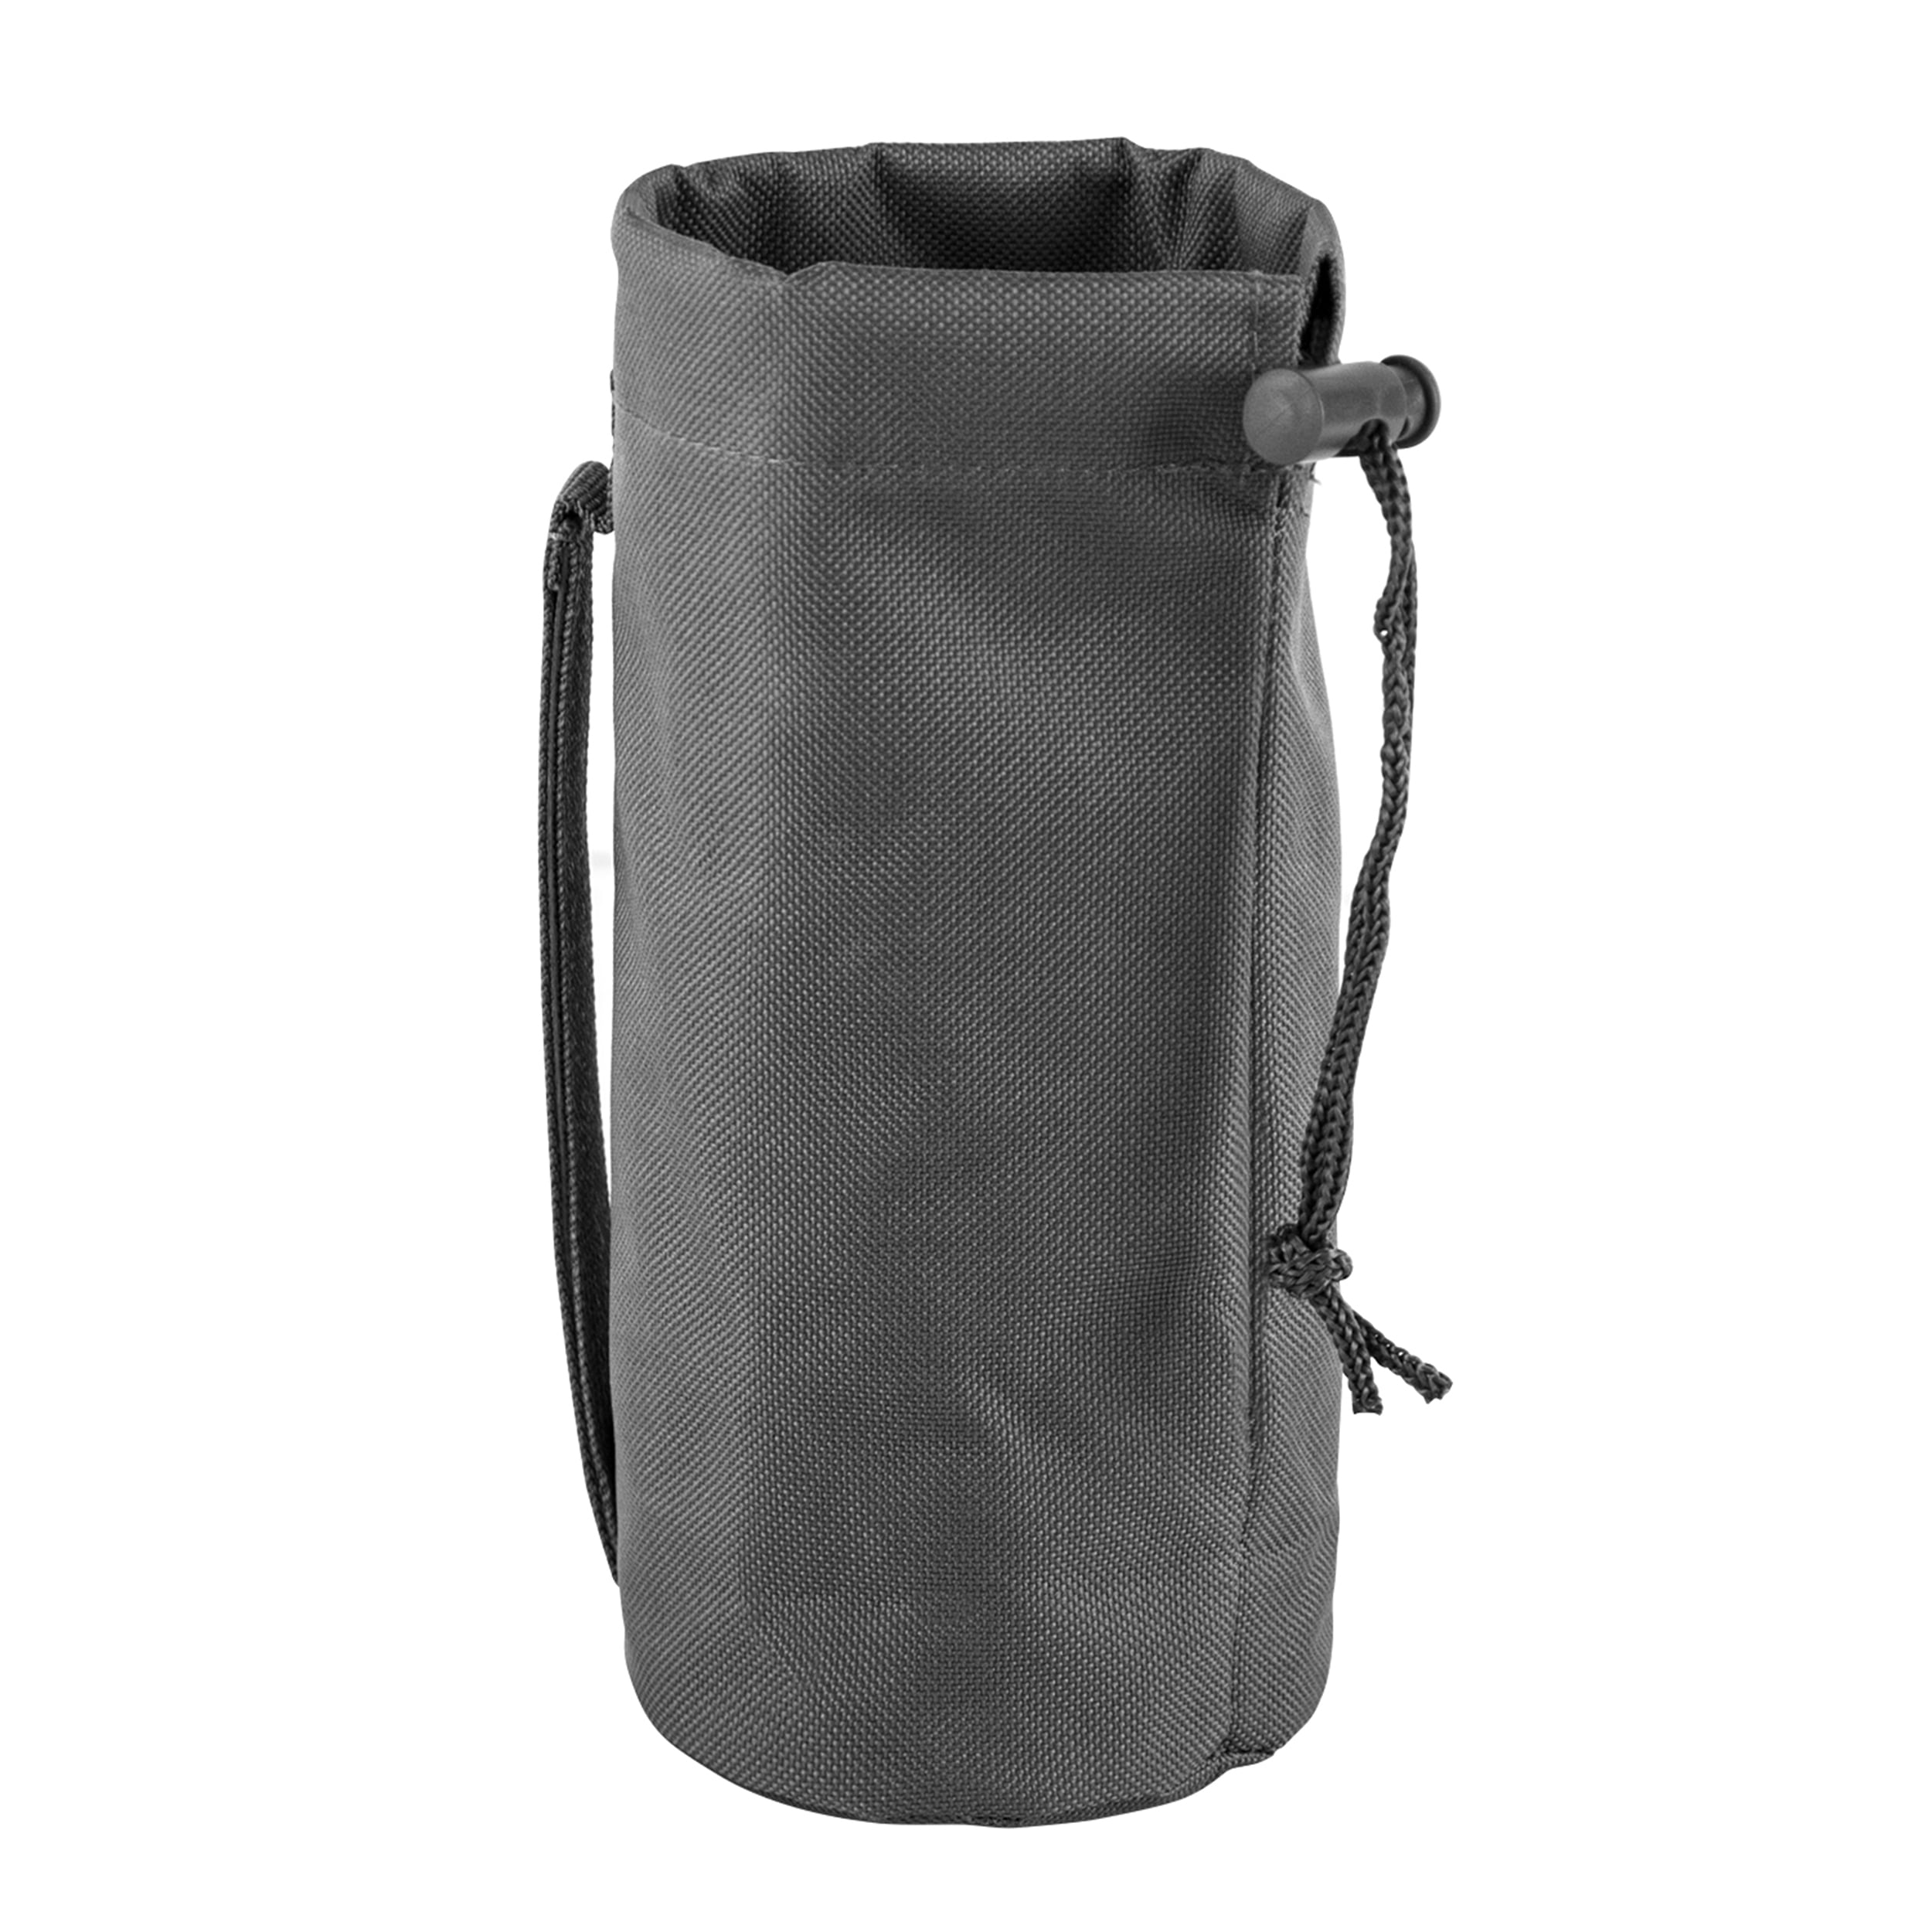 Black MOLLE Gear Hydration Water Bottle Pouch Utility Holder PALS Straps 3.25" 